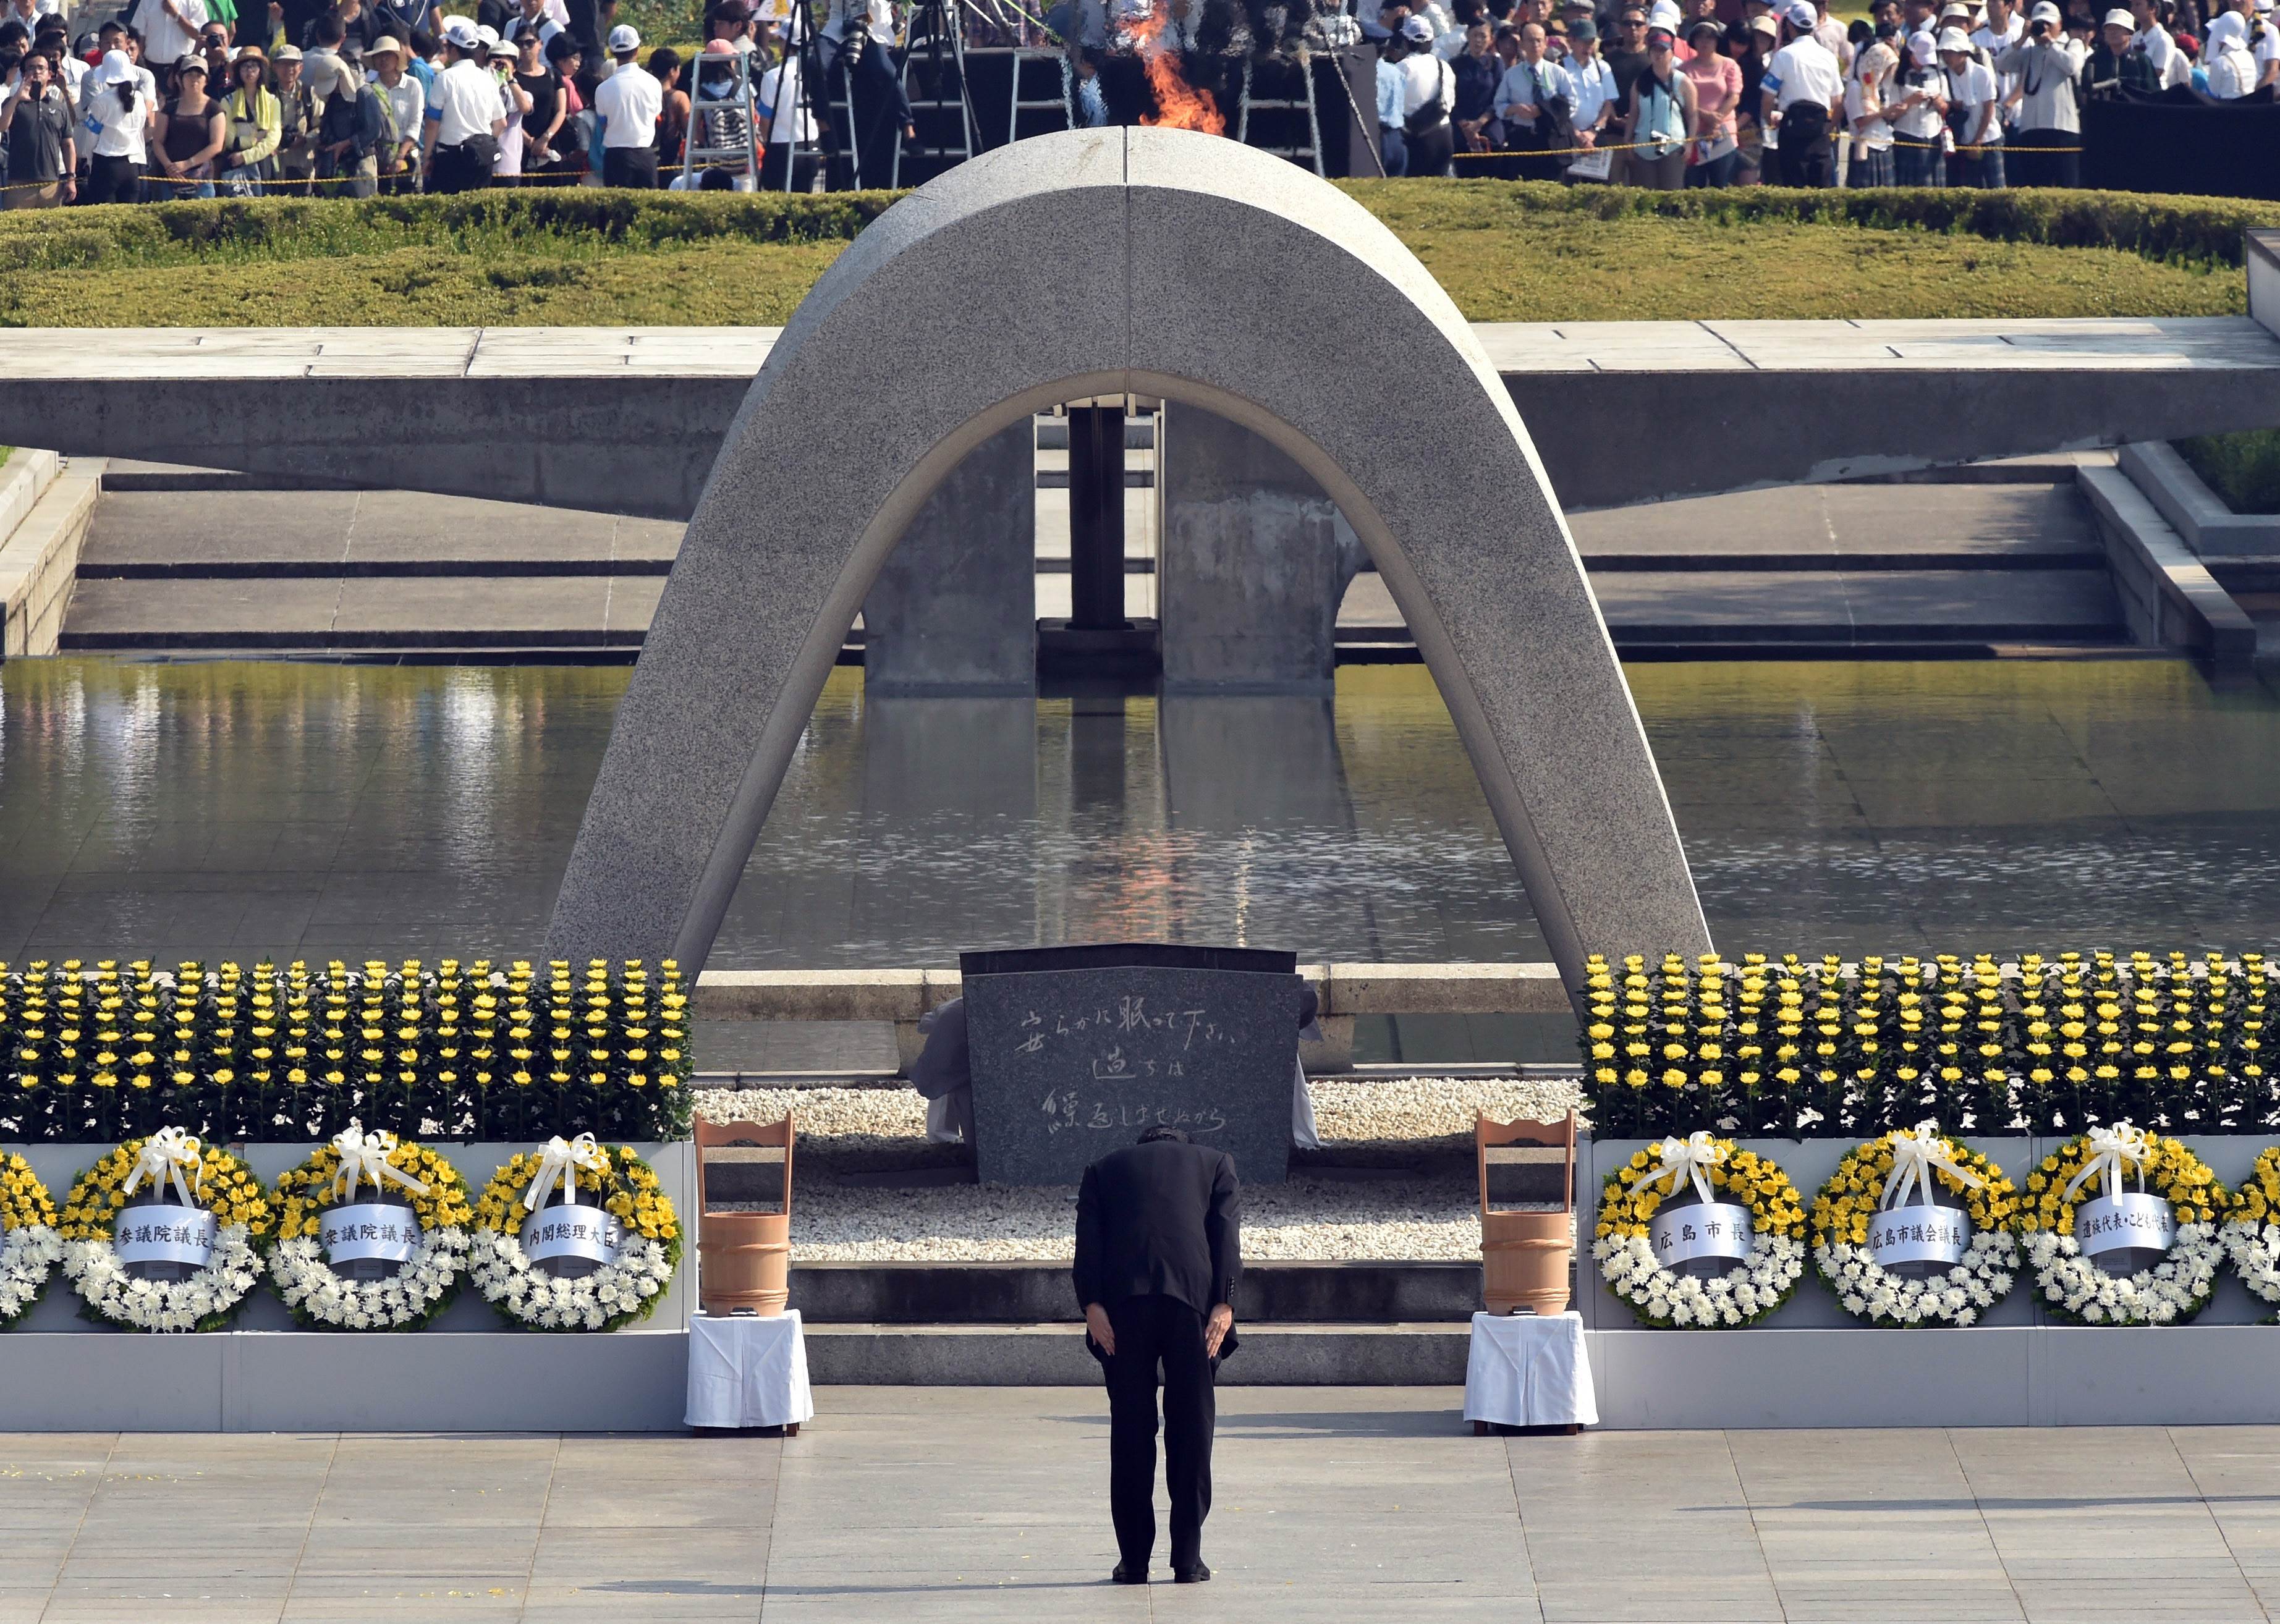 Prime Minister Shinzo Abe bows in front of the memorial cenotaph for victims of a 1945 atomic bombing during a memorial ceremony to mark the 70th anniversary at the Hiroshima Peace Memorial Park on Thursday.  | AFP-JIJI